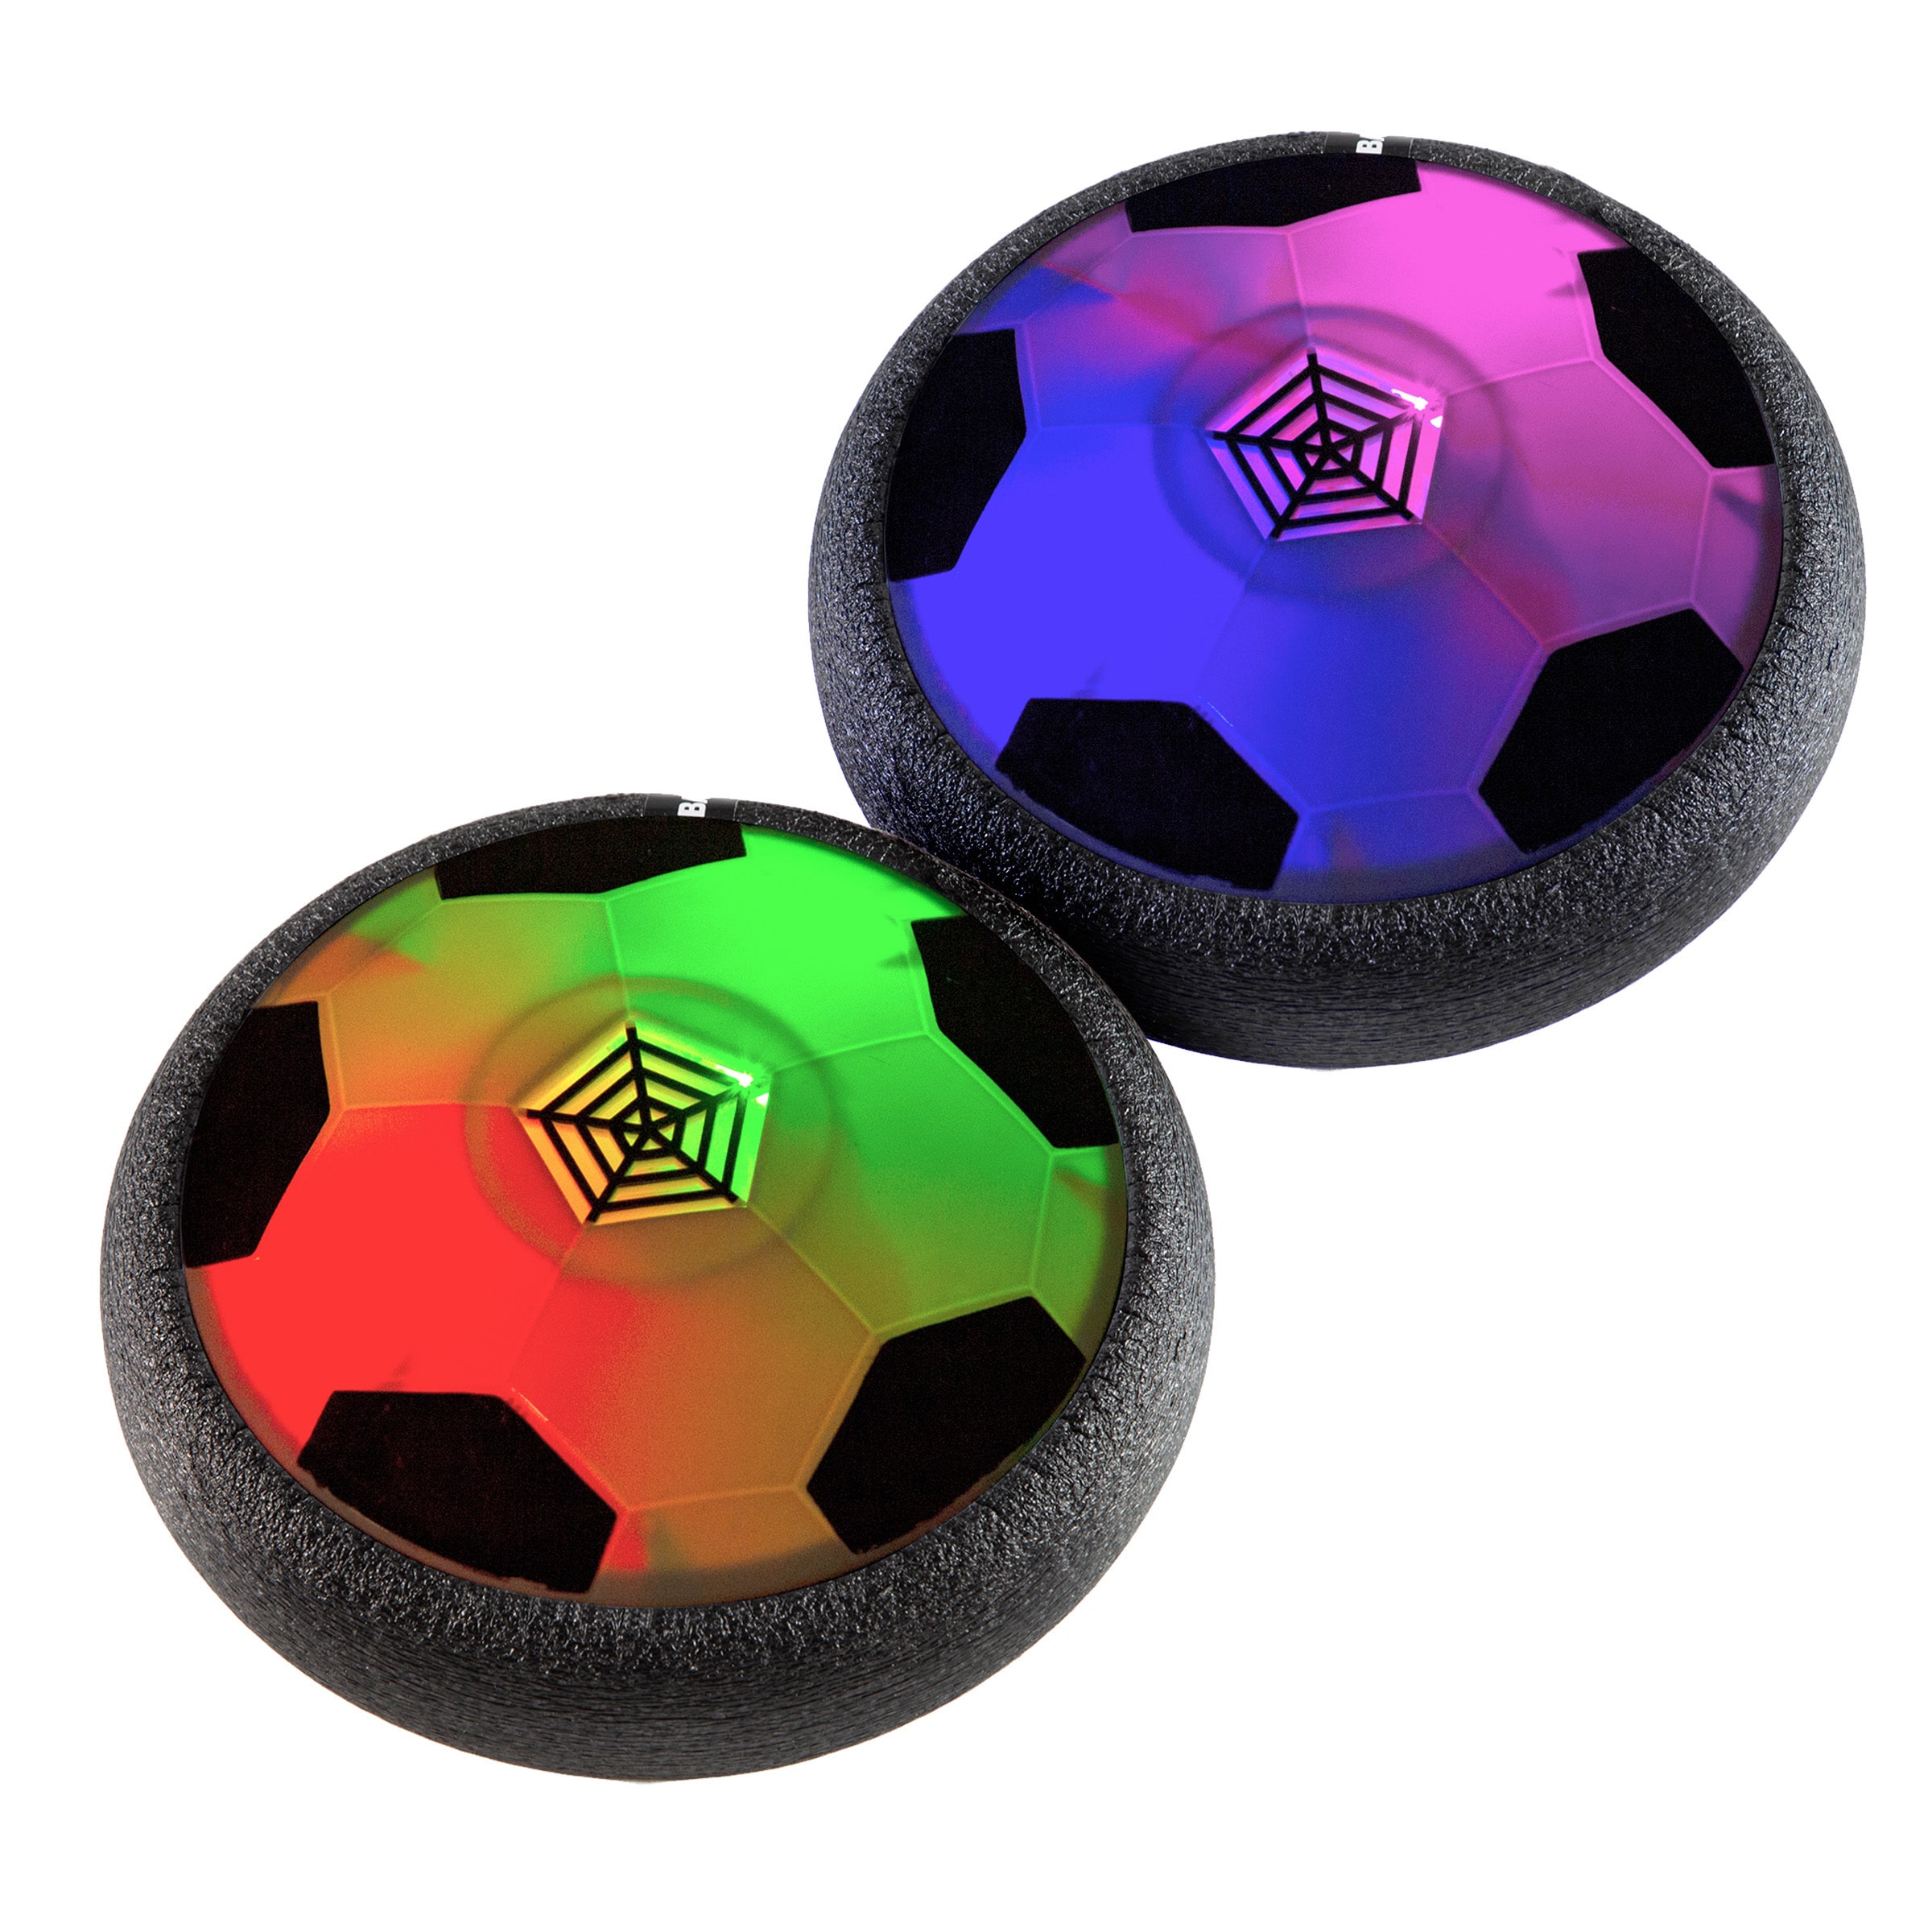 Trademark Games Hover Ball 2-Pack Air Soccer Balls with Soft Bumpers